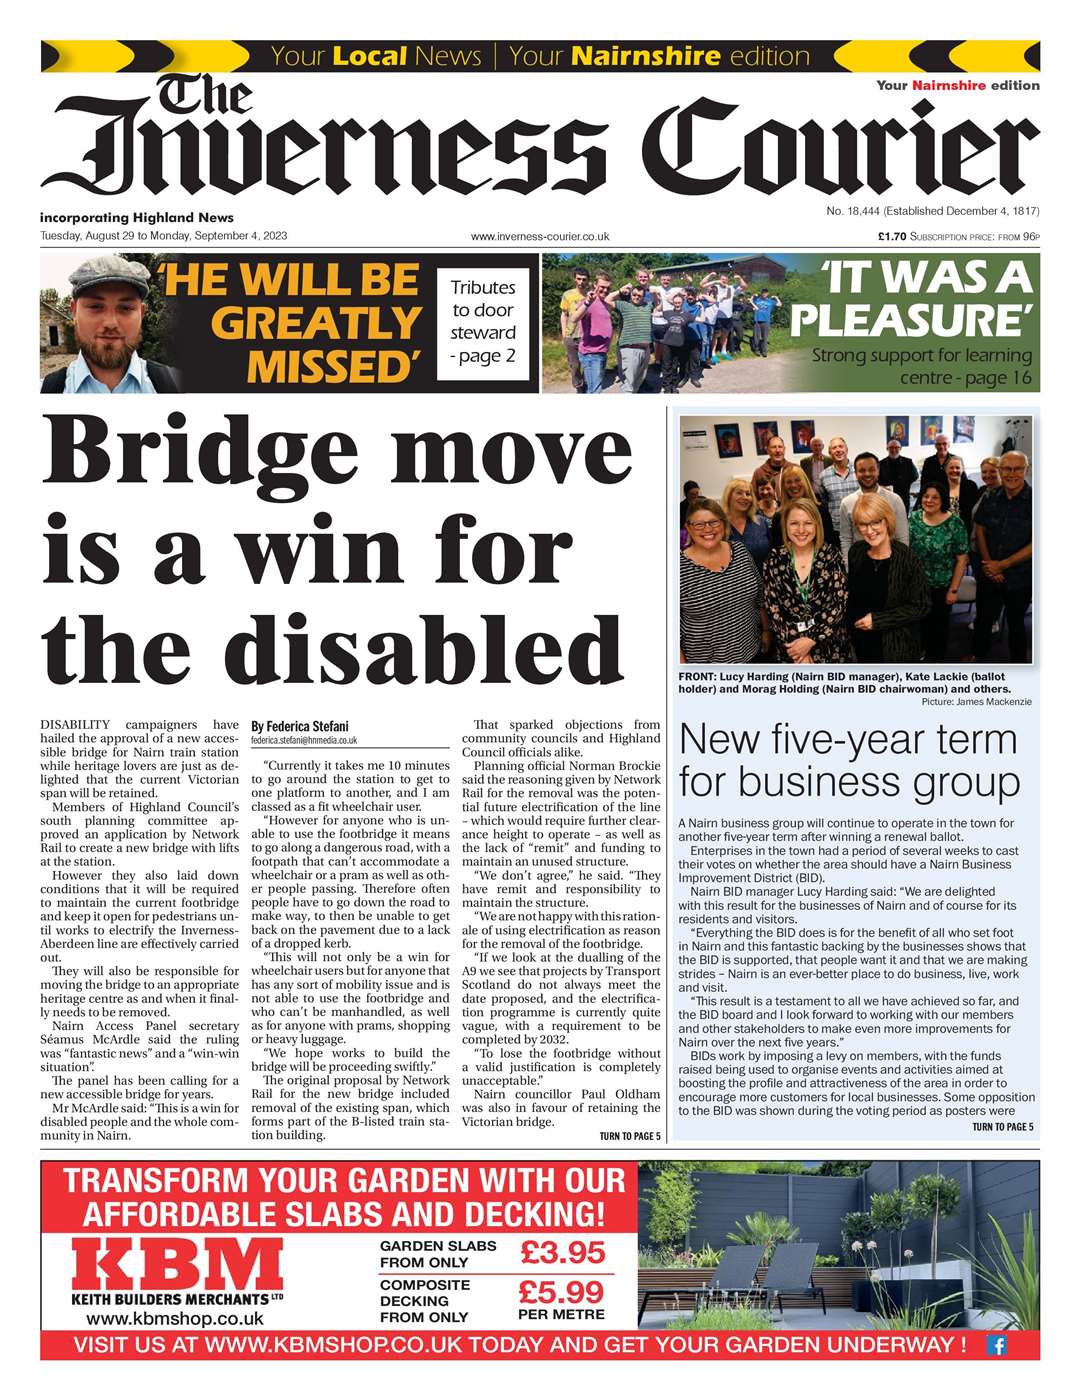 The Inverness Courier (Nairnshire edition), August 29, front page.